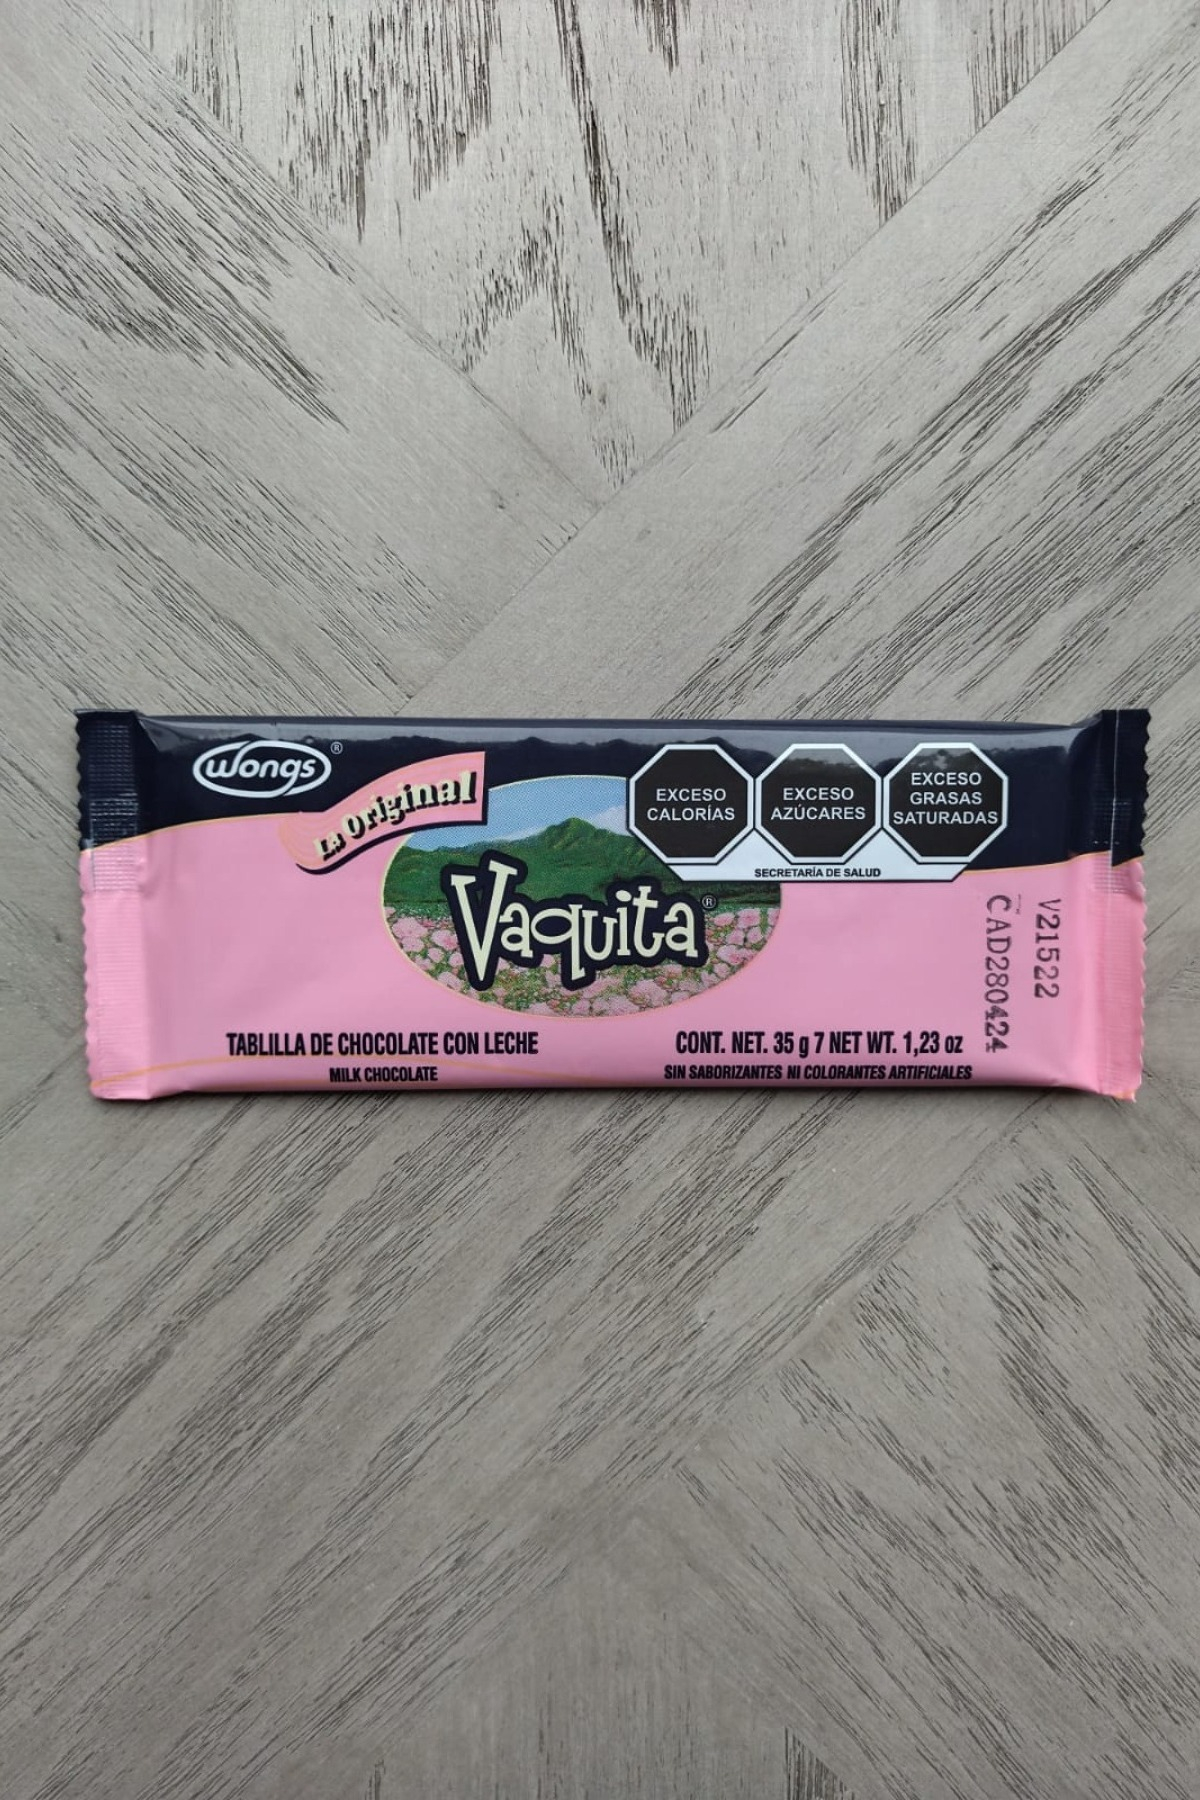 Vaquita chocolate bar: The Best Mexican Candy